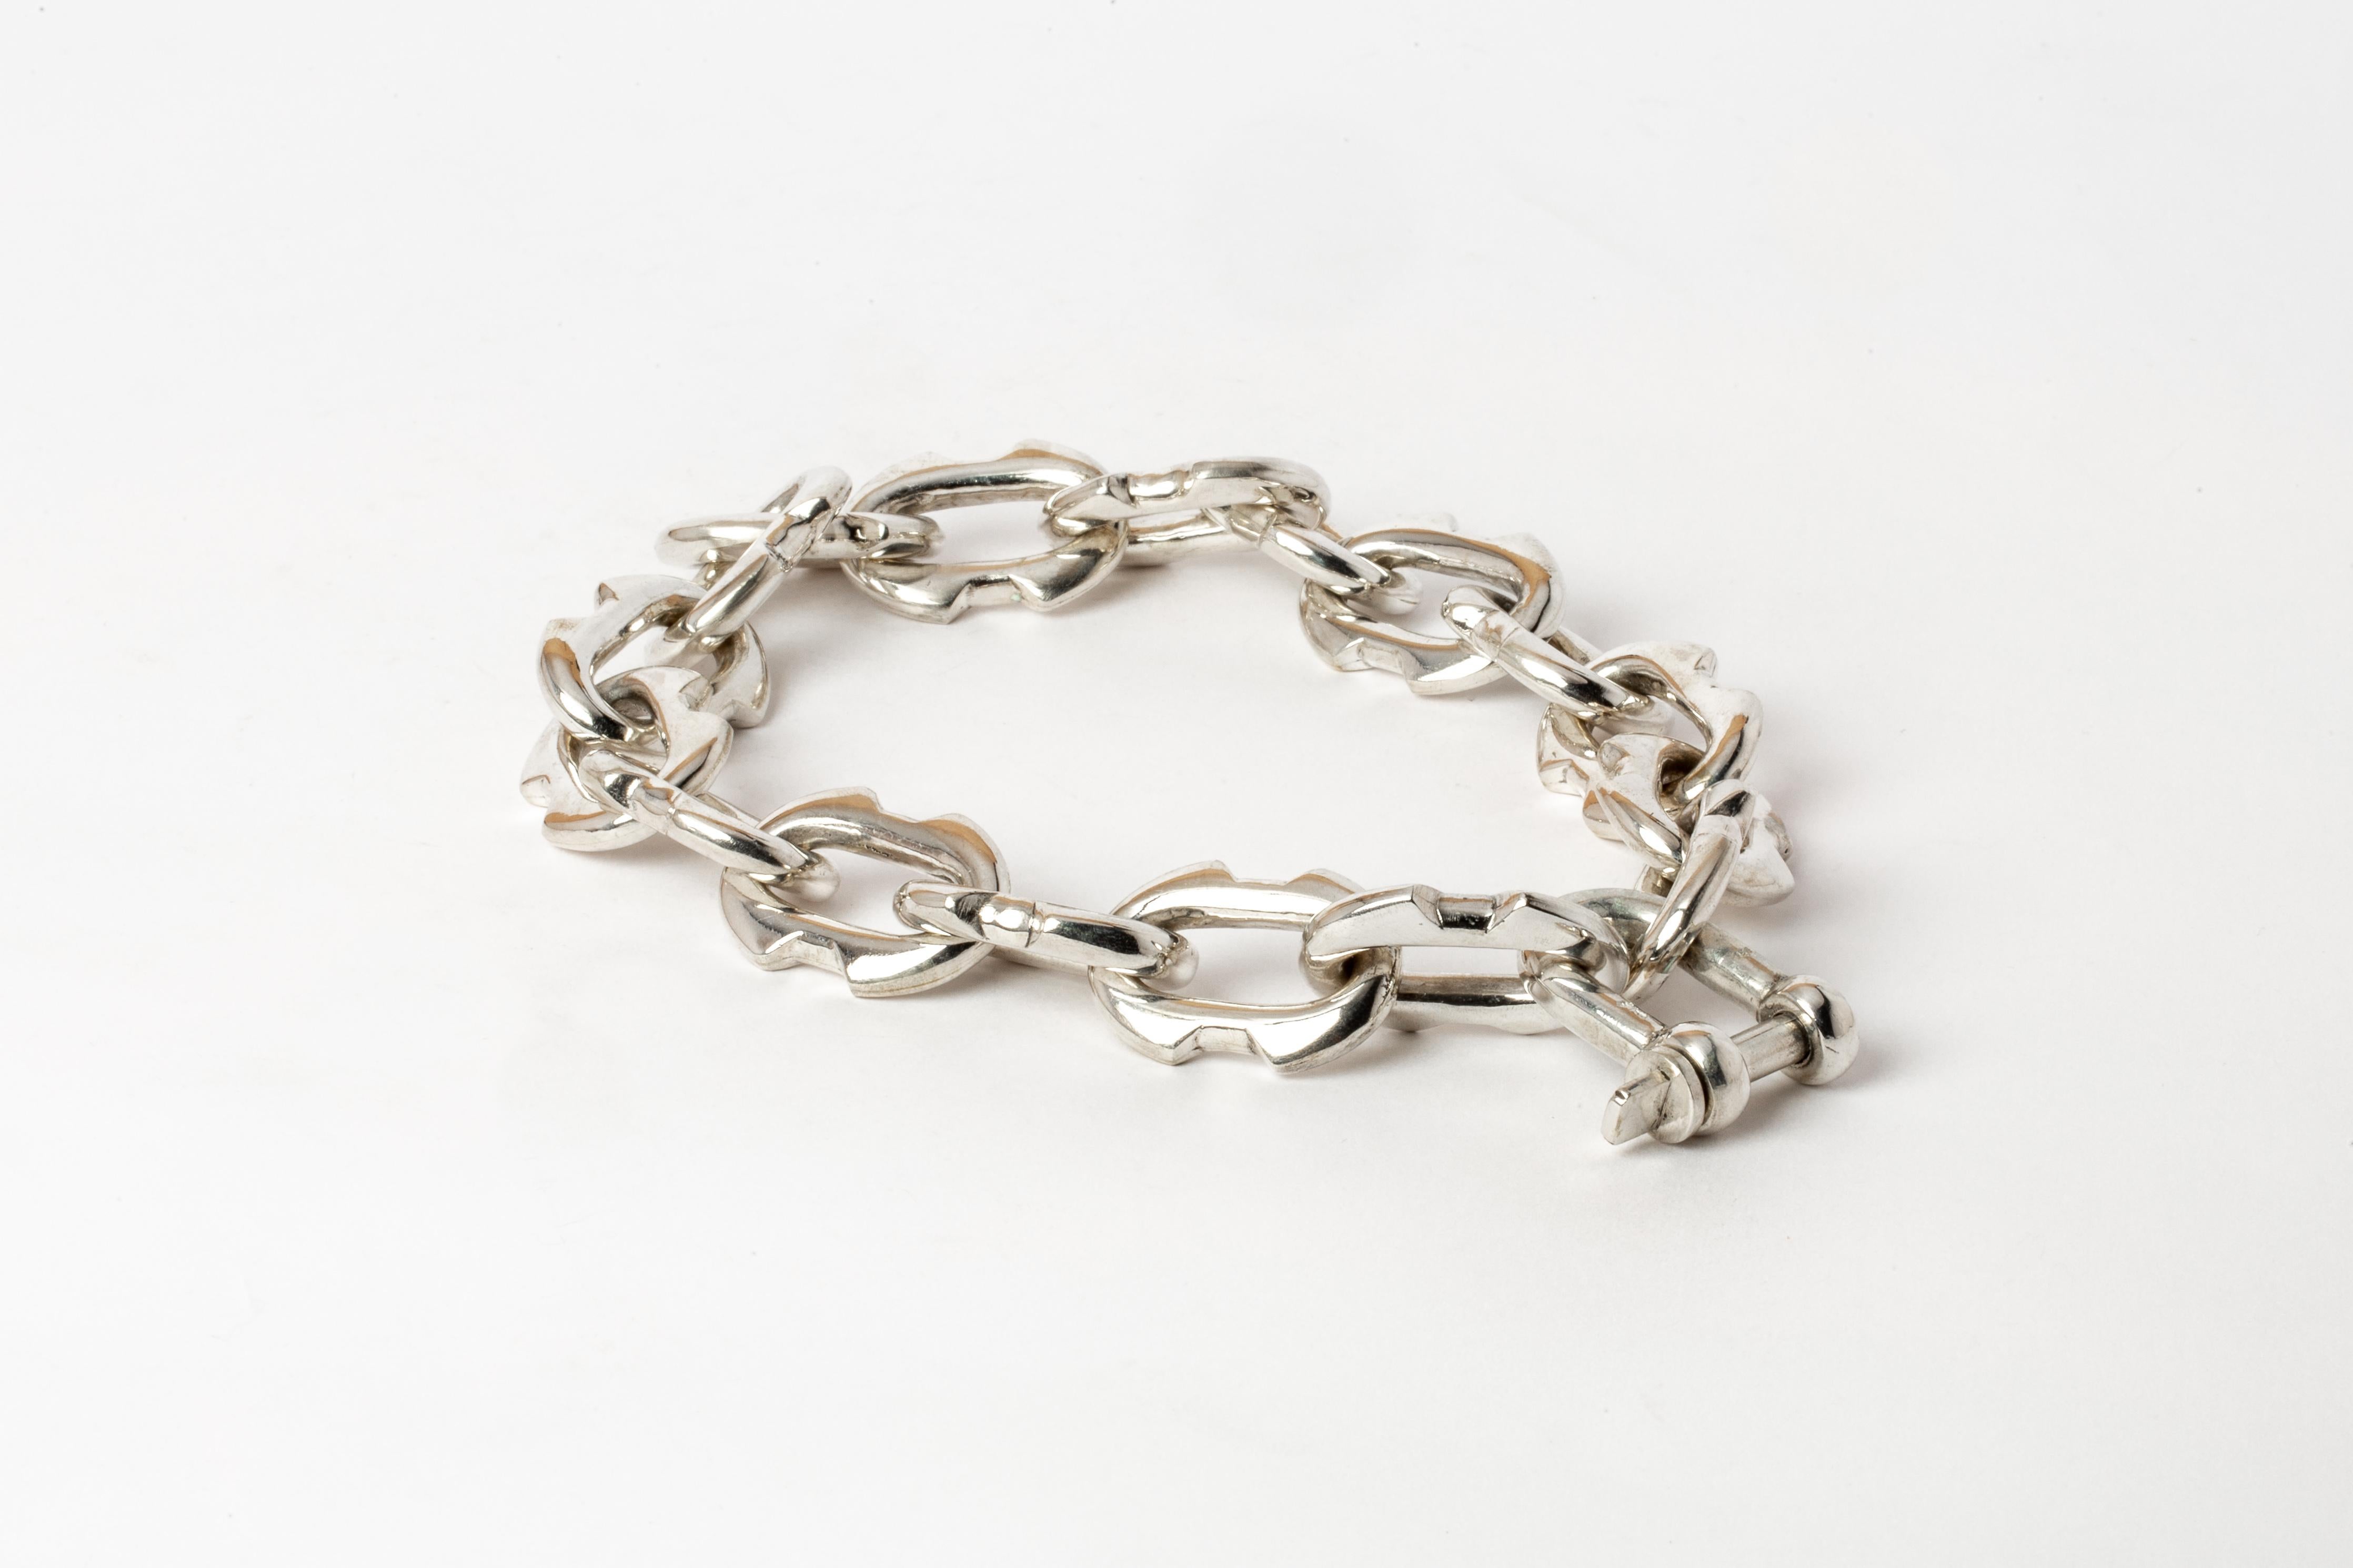 Charm chain necklace in polished sterling silver.
The Charm System is an interrelated group of products that can be mixed and matched or worn individually.
Chain link size (L × H): 33 mm × 24 mm
Chain length: 400 mm
U-bolt (H × W): 35 mm × 23 mm